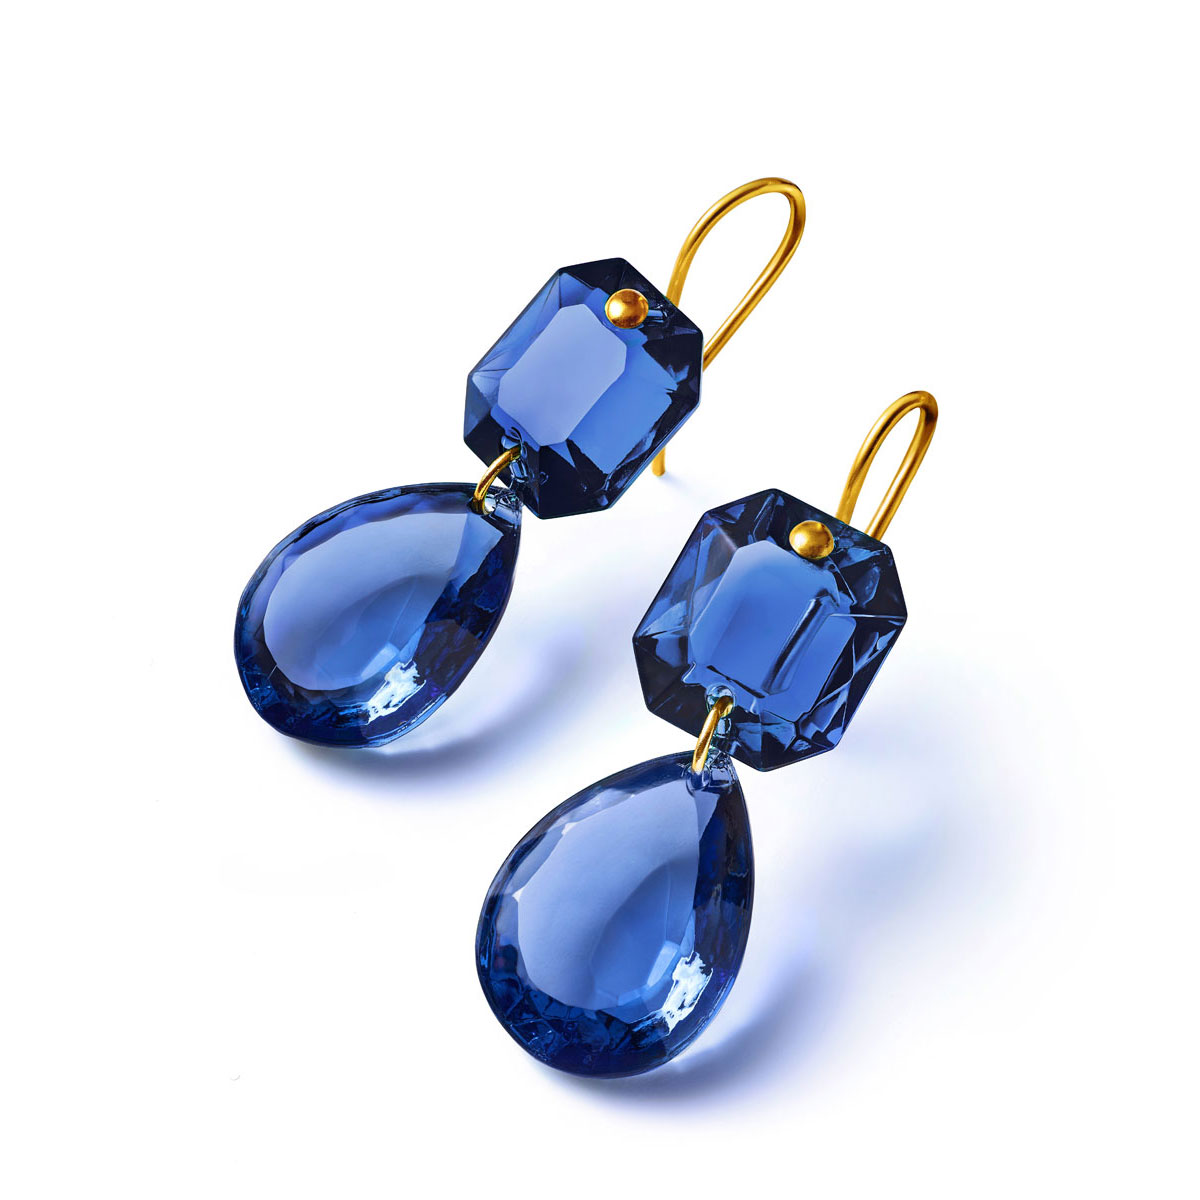 Baccarat Crystal Marie-Helene De Taillac Earrings Large Wire Vermeil Gold Blue